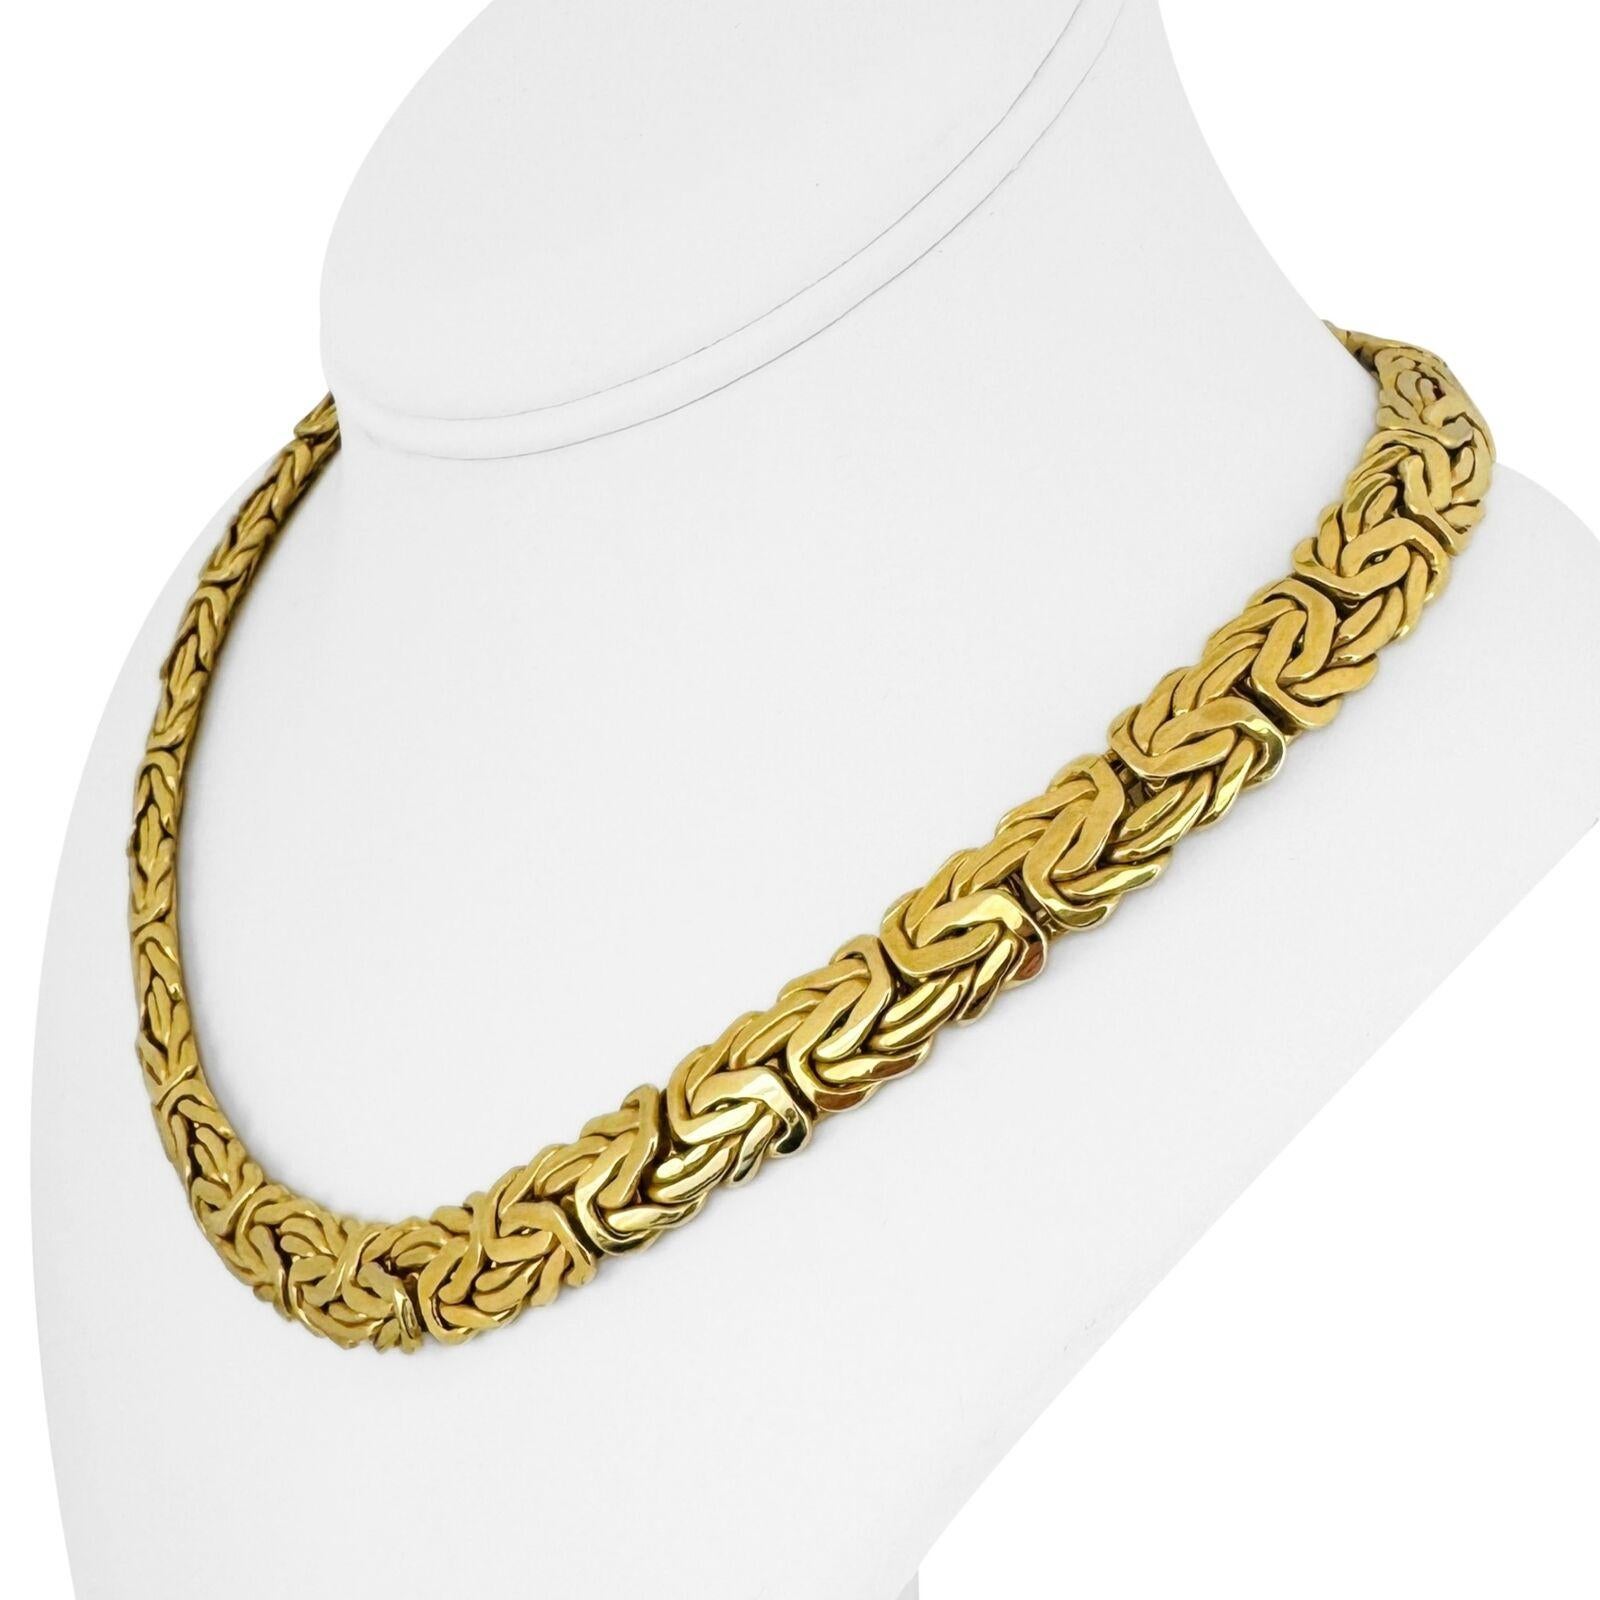 14k Yellow Gold 52g Ladies Thick 11mm Byzantine Link Chain Necklace 18